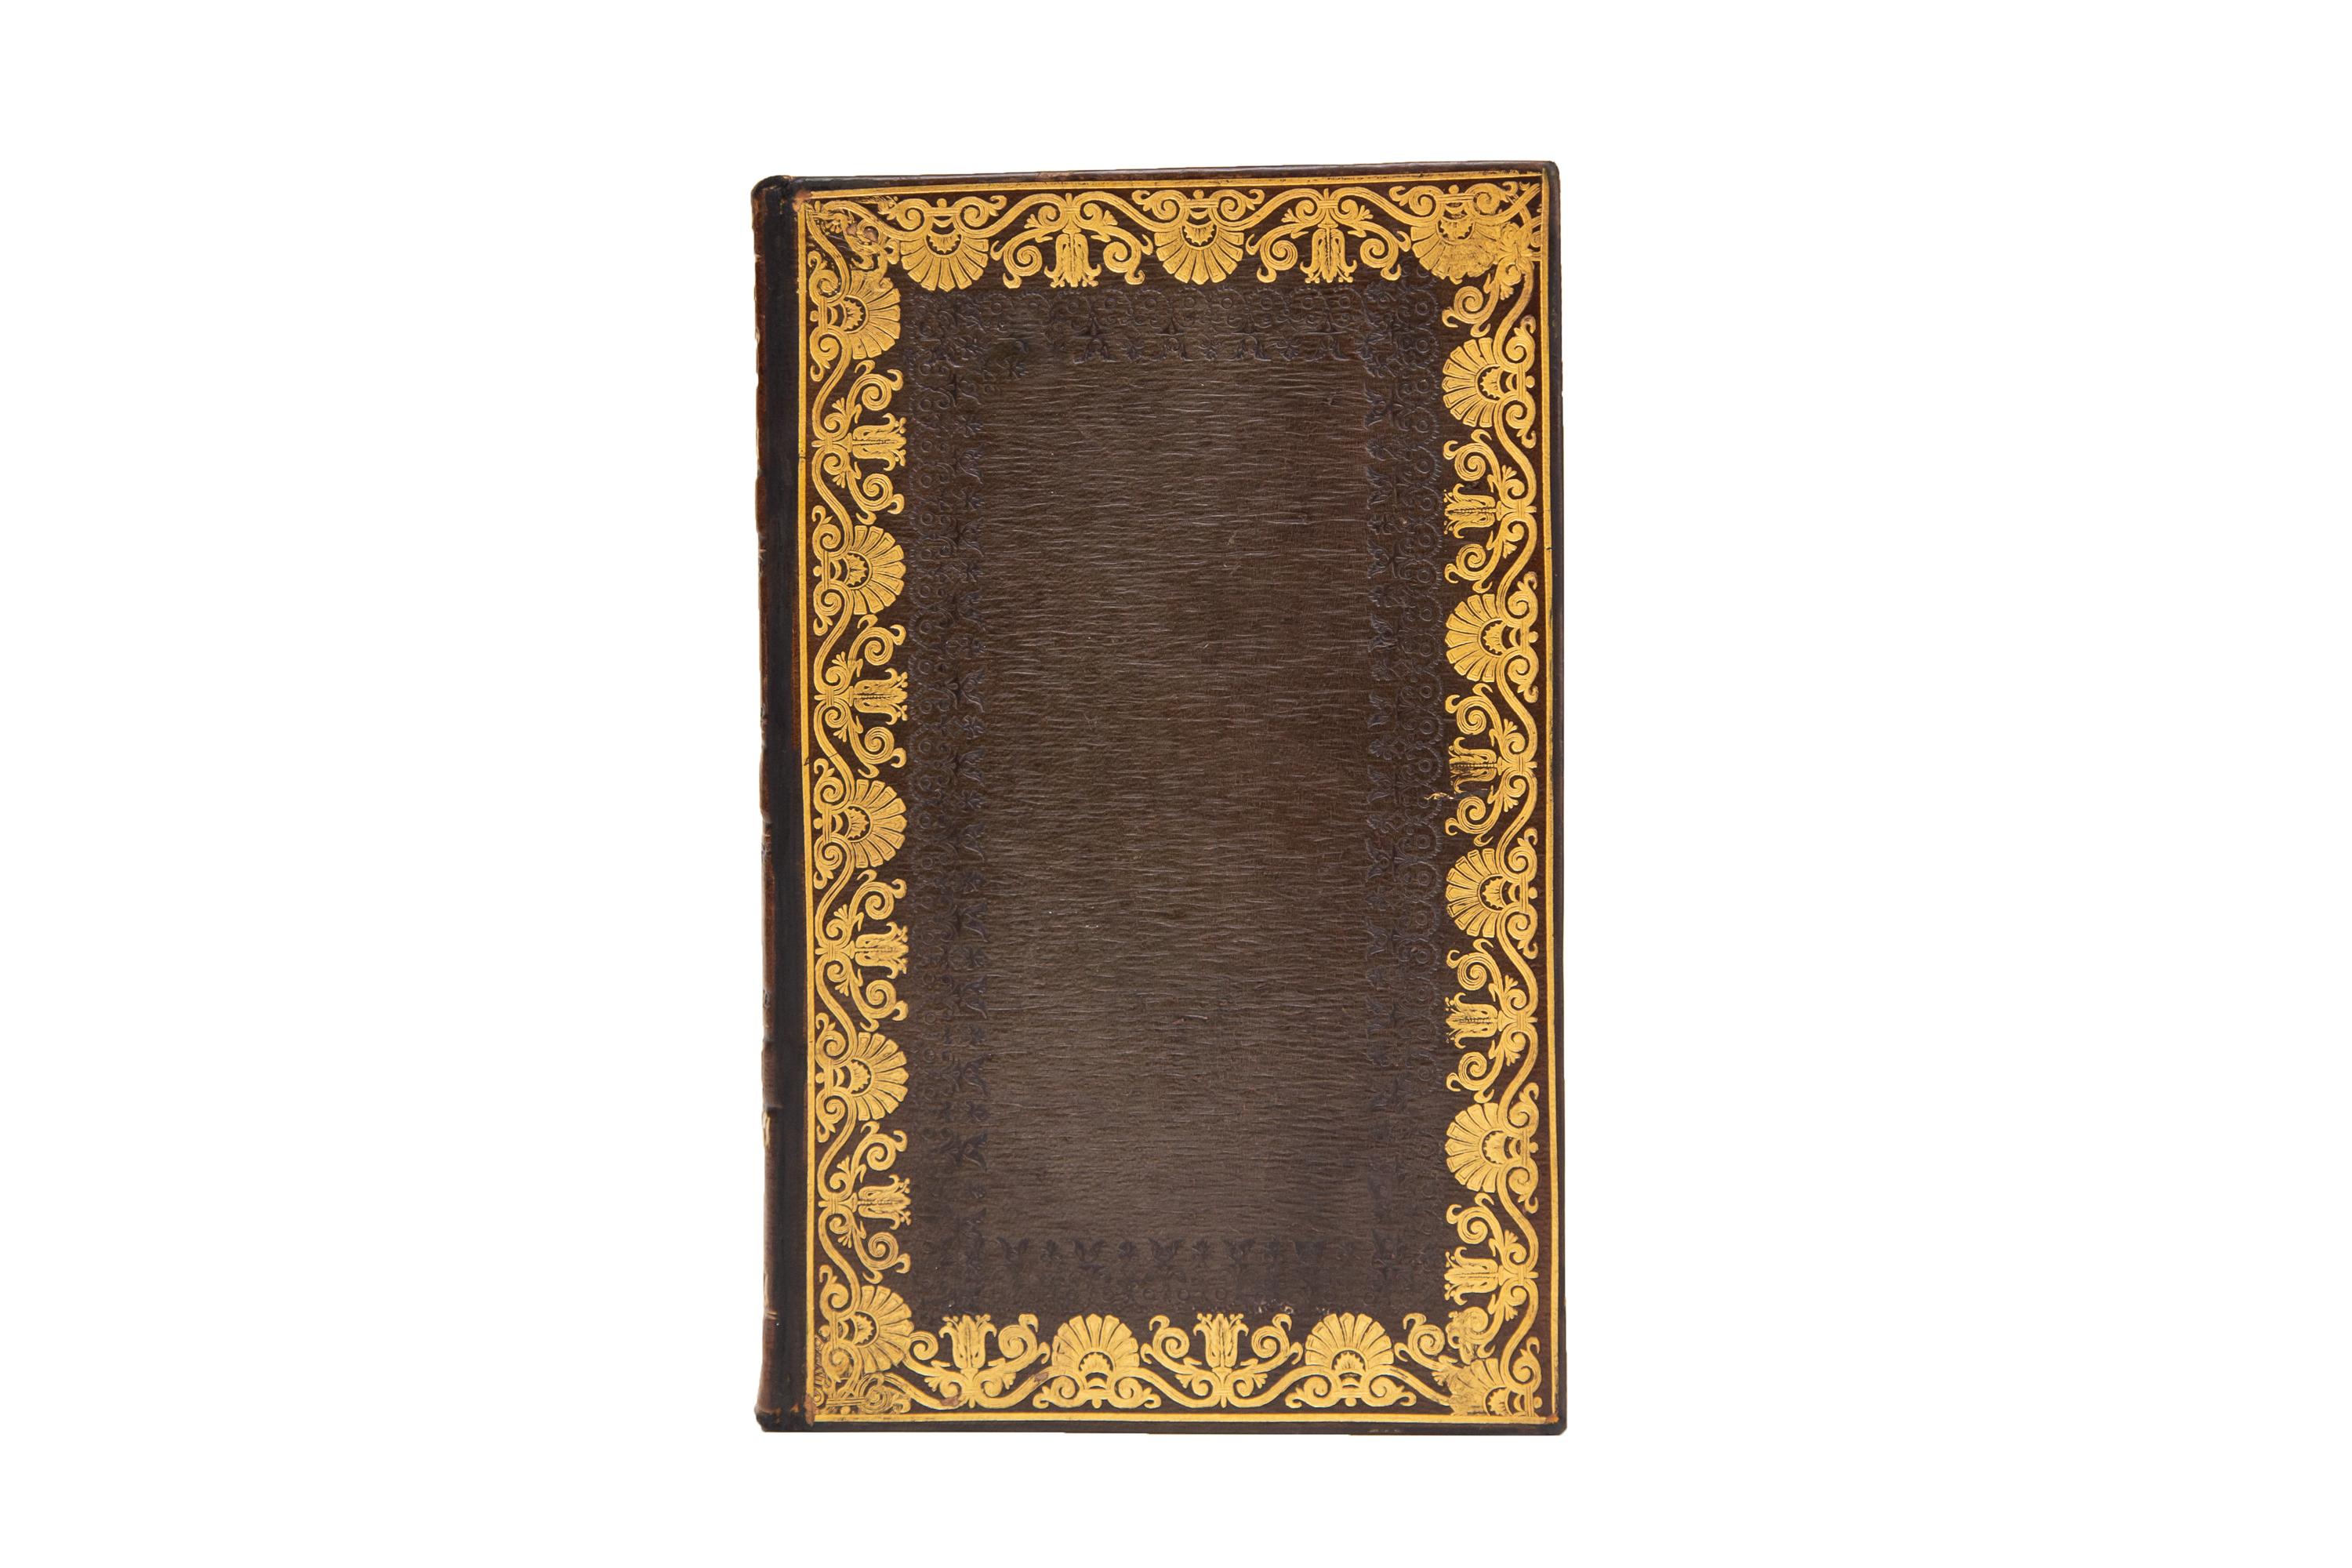 4 Volumes. Cervantes, Don Quixote. Bound in full brown morocco with the covers displaying ornate floral gilt and open tooling. Raised bands, ornately gilt-tooled with panels displaying a knight's armor, floral detailing, and label lettering in gilt